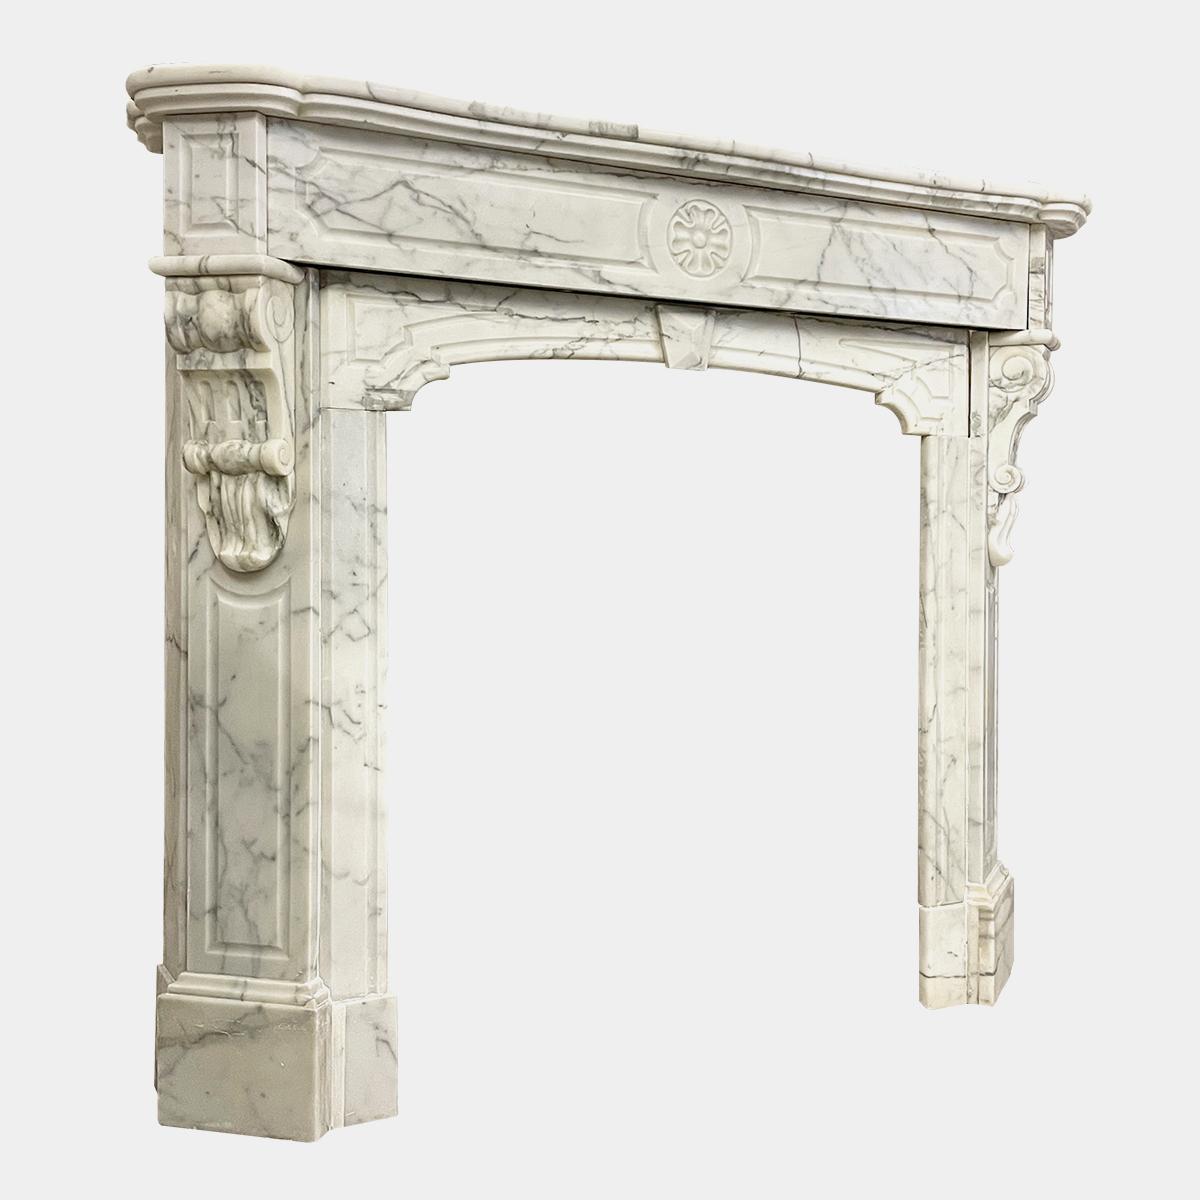 Carved Antique French Fireplace Mantel in Arabescato Marble